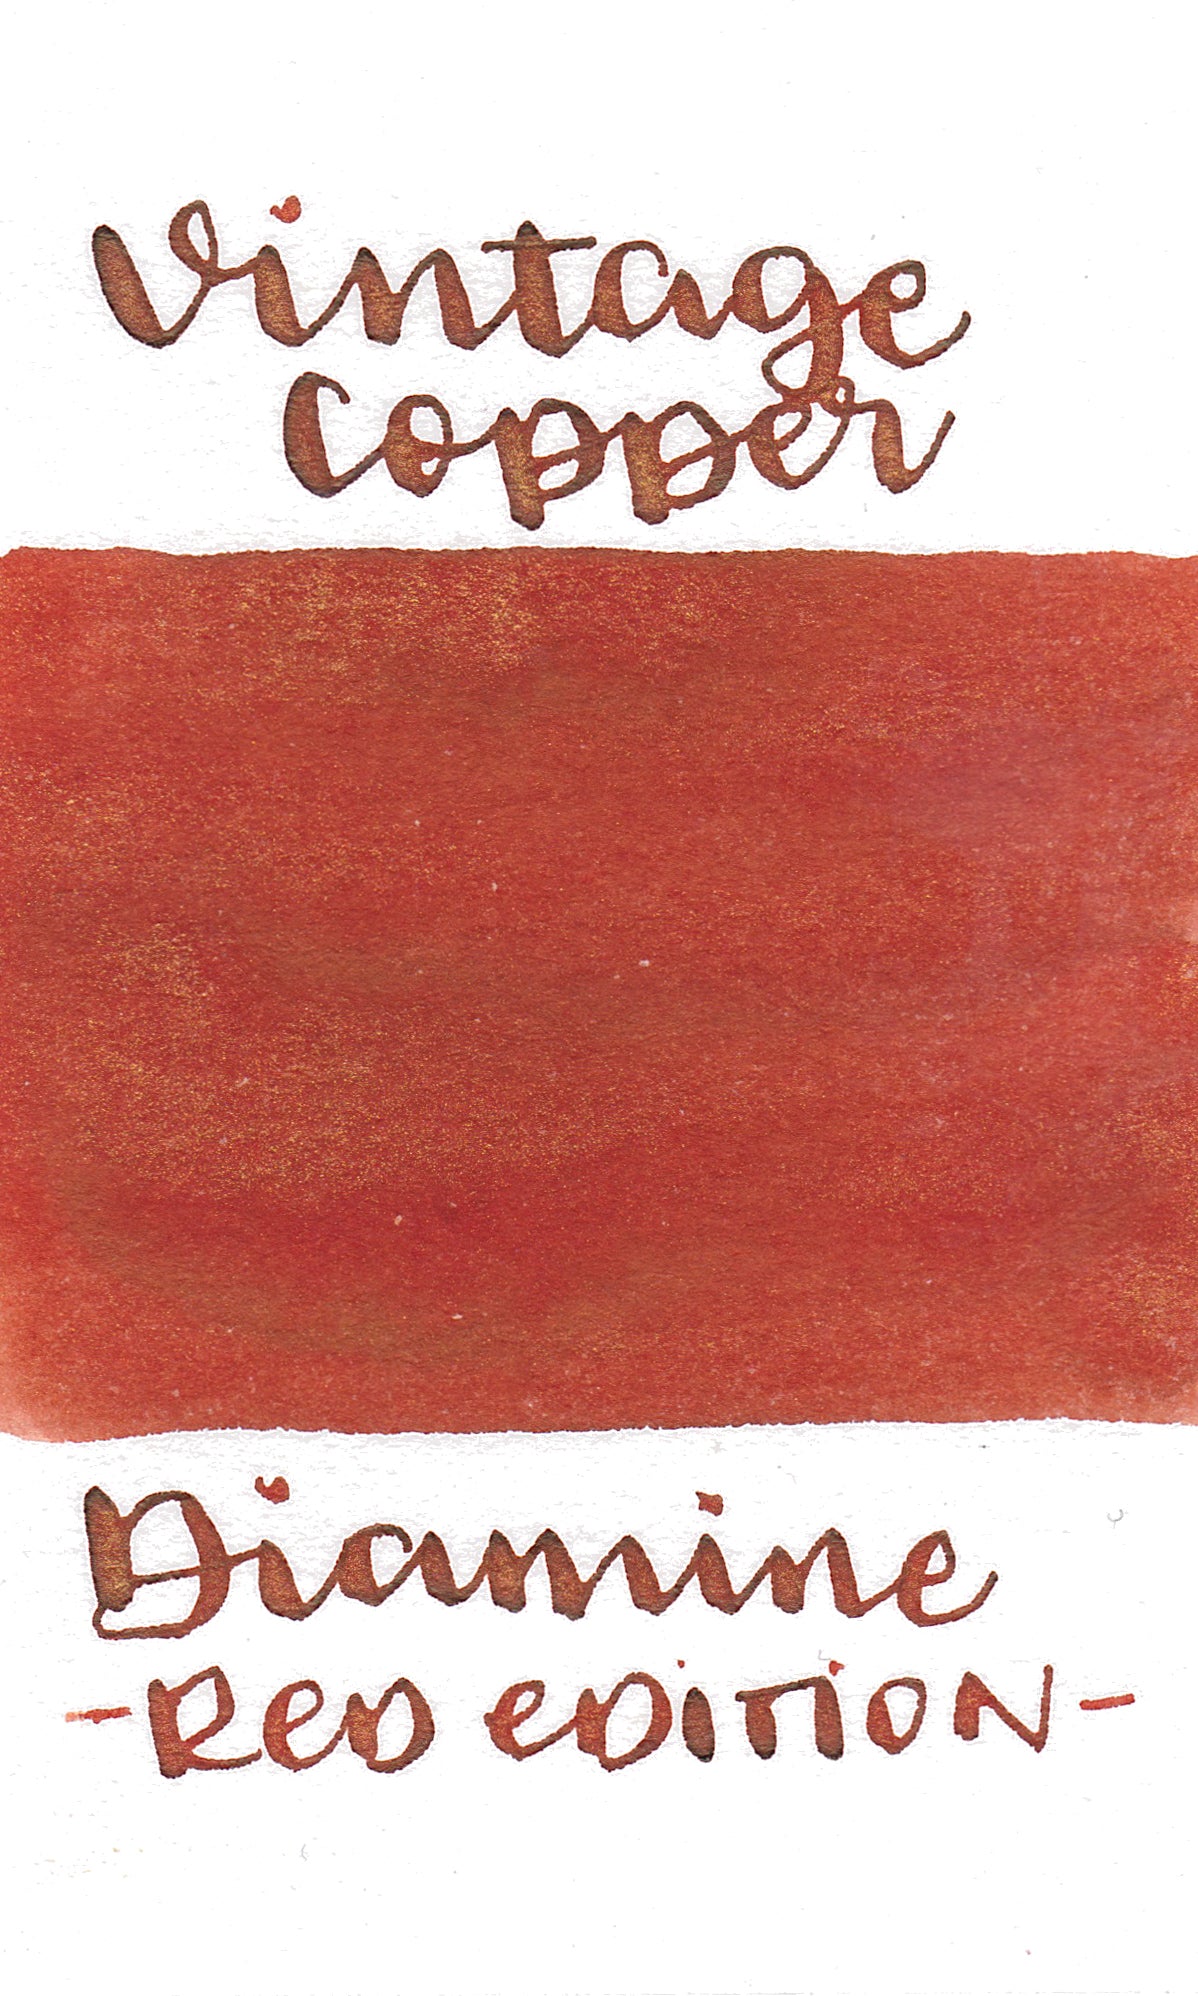 Diamine Red Edition Vintage Copper Shimmer